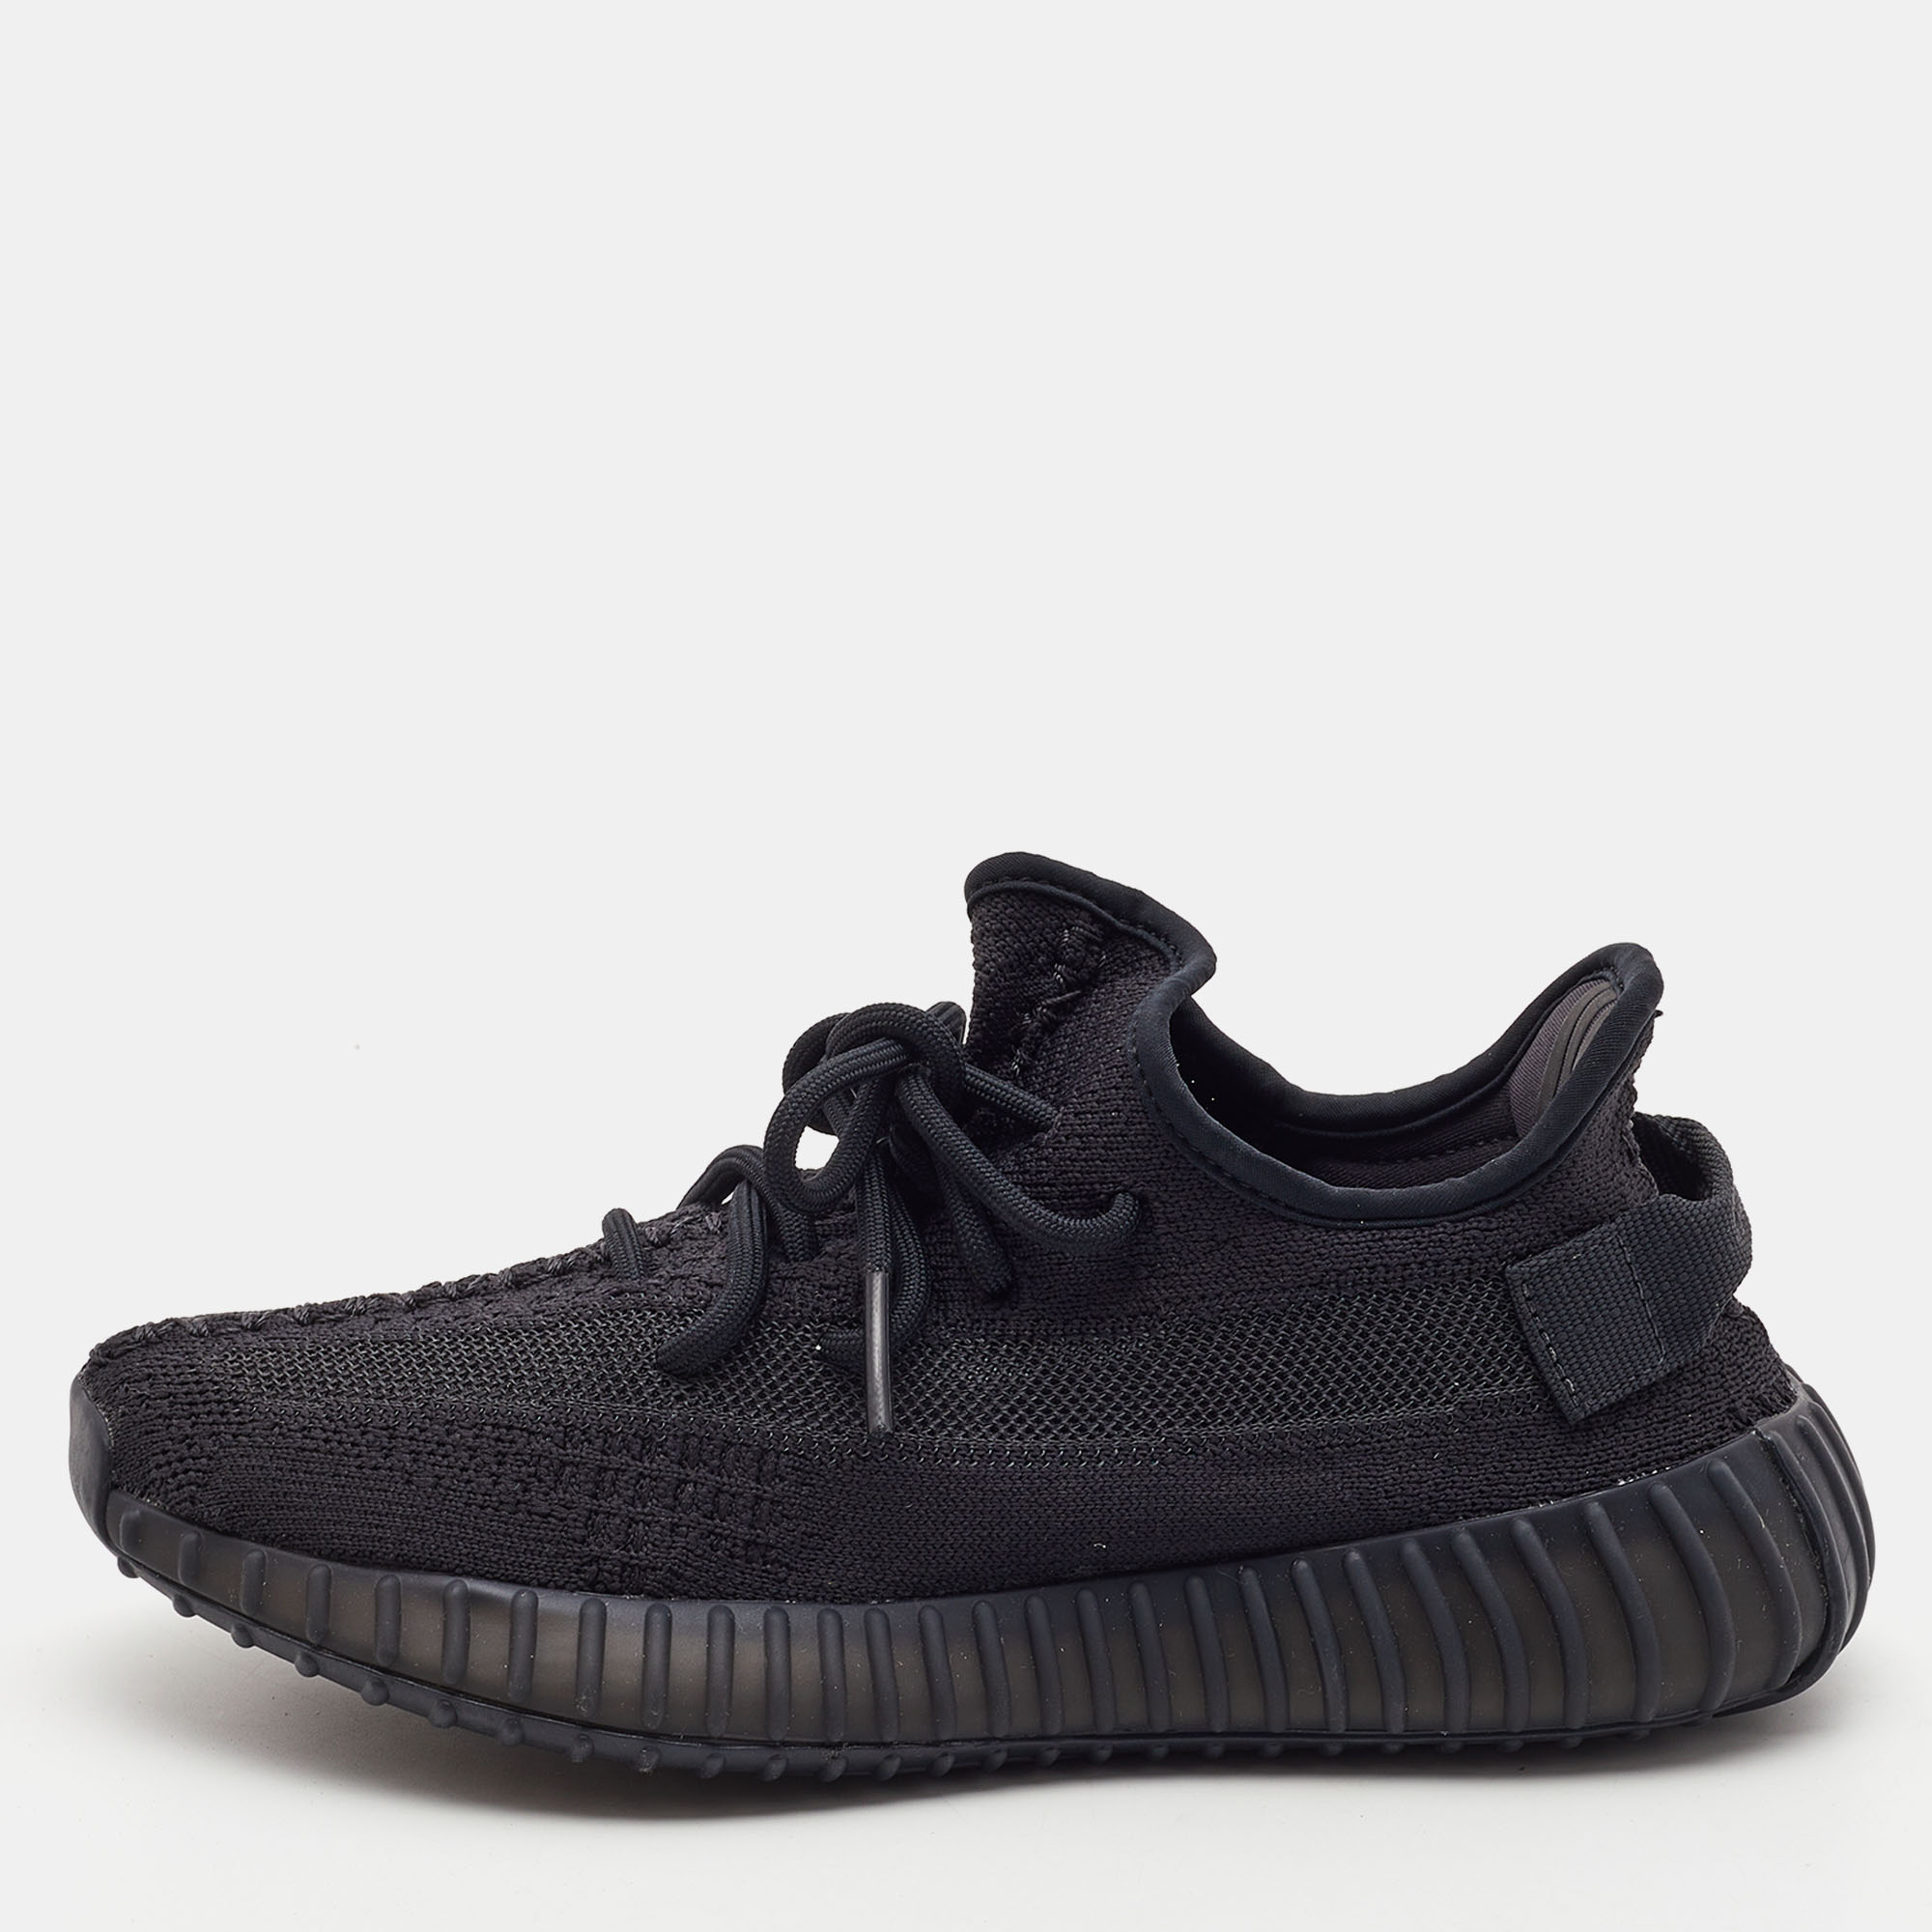 

Yeezy x Adidas Black Fabric Boost 350 V2 Cinder Sneakers Size